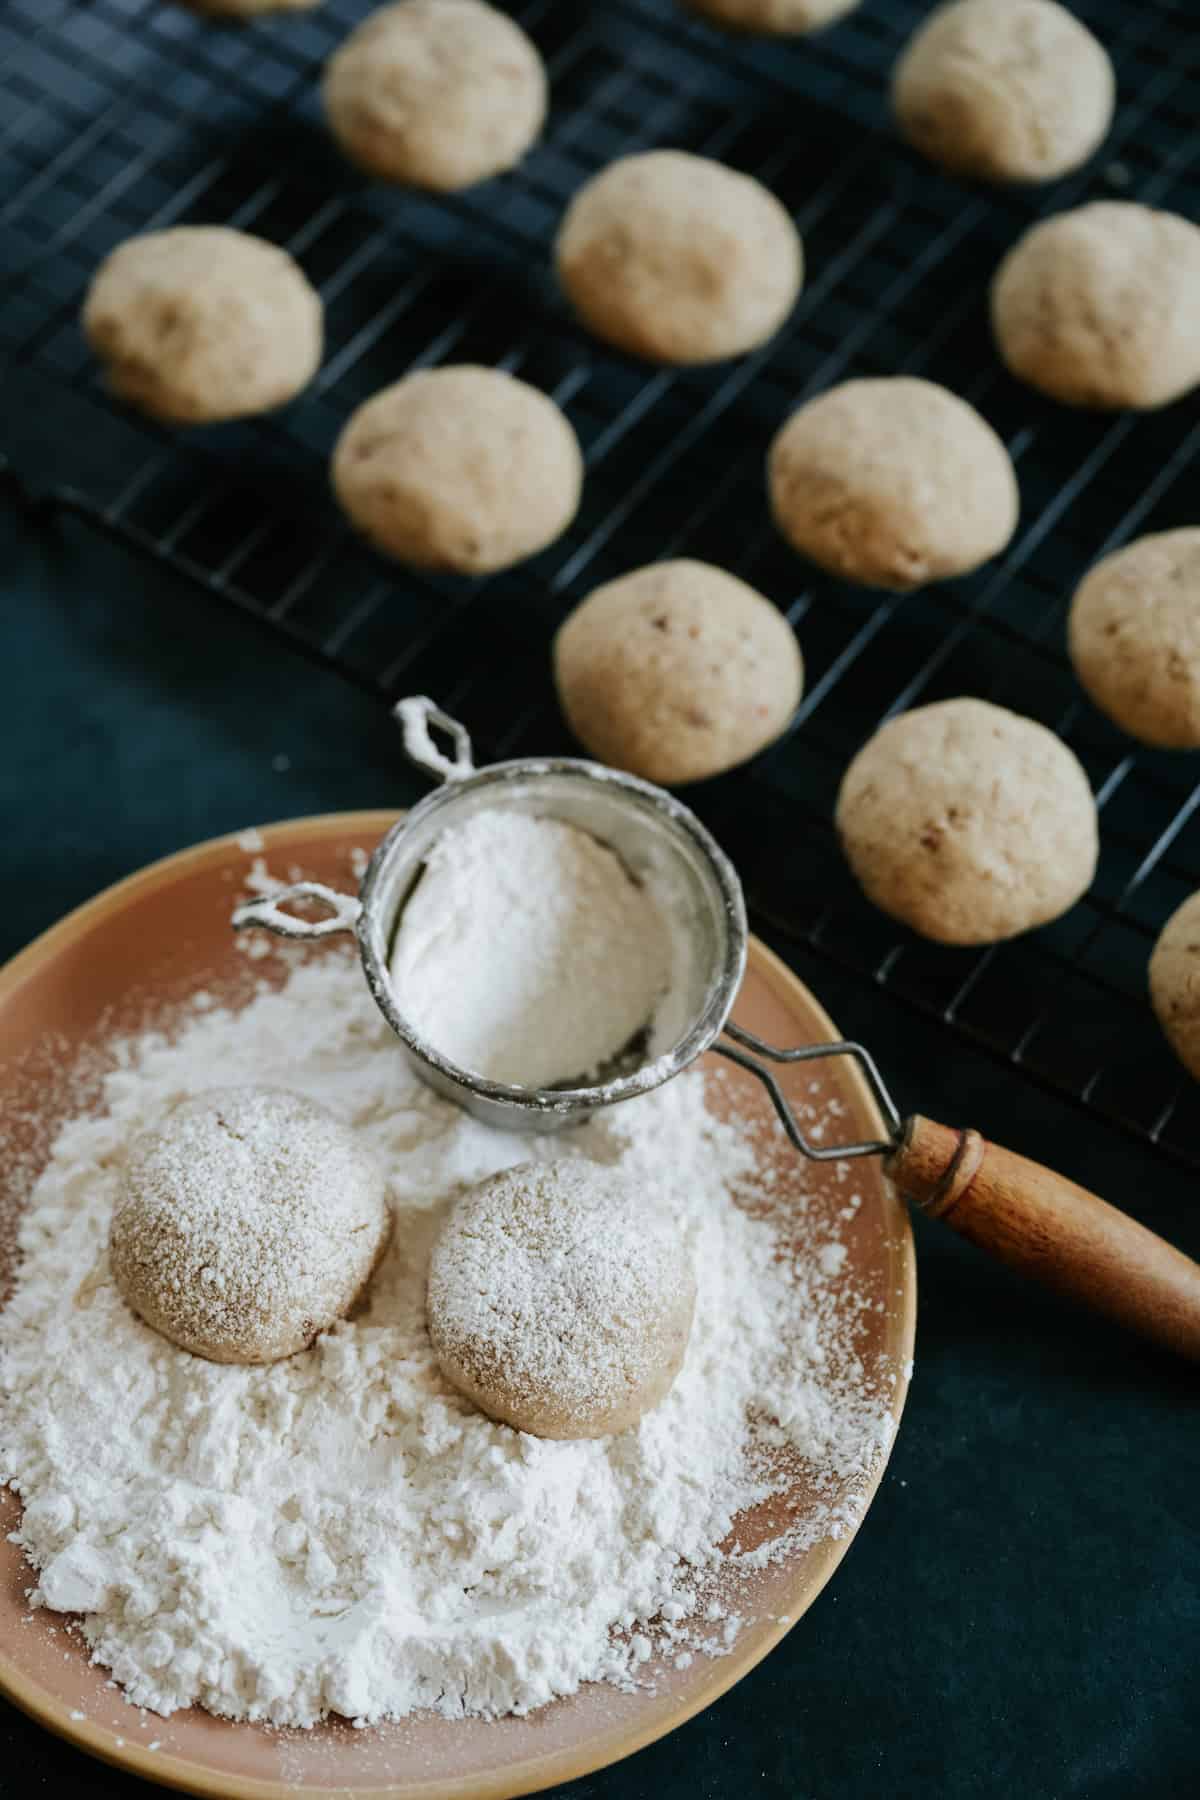 Polvorones Cookies (Mexican Wedding Cookies) that are being dusted with powdered sugar.